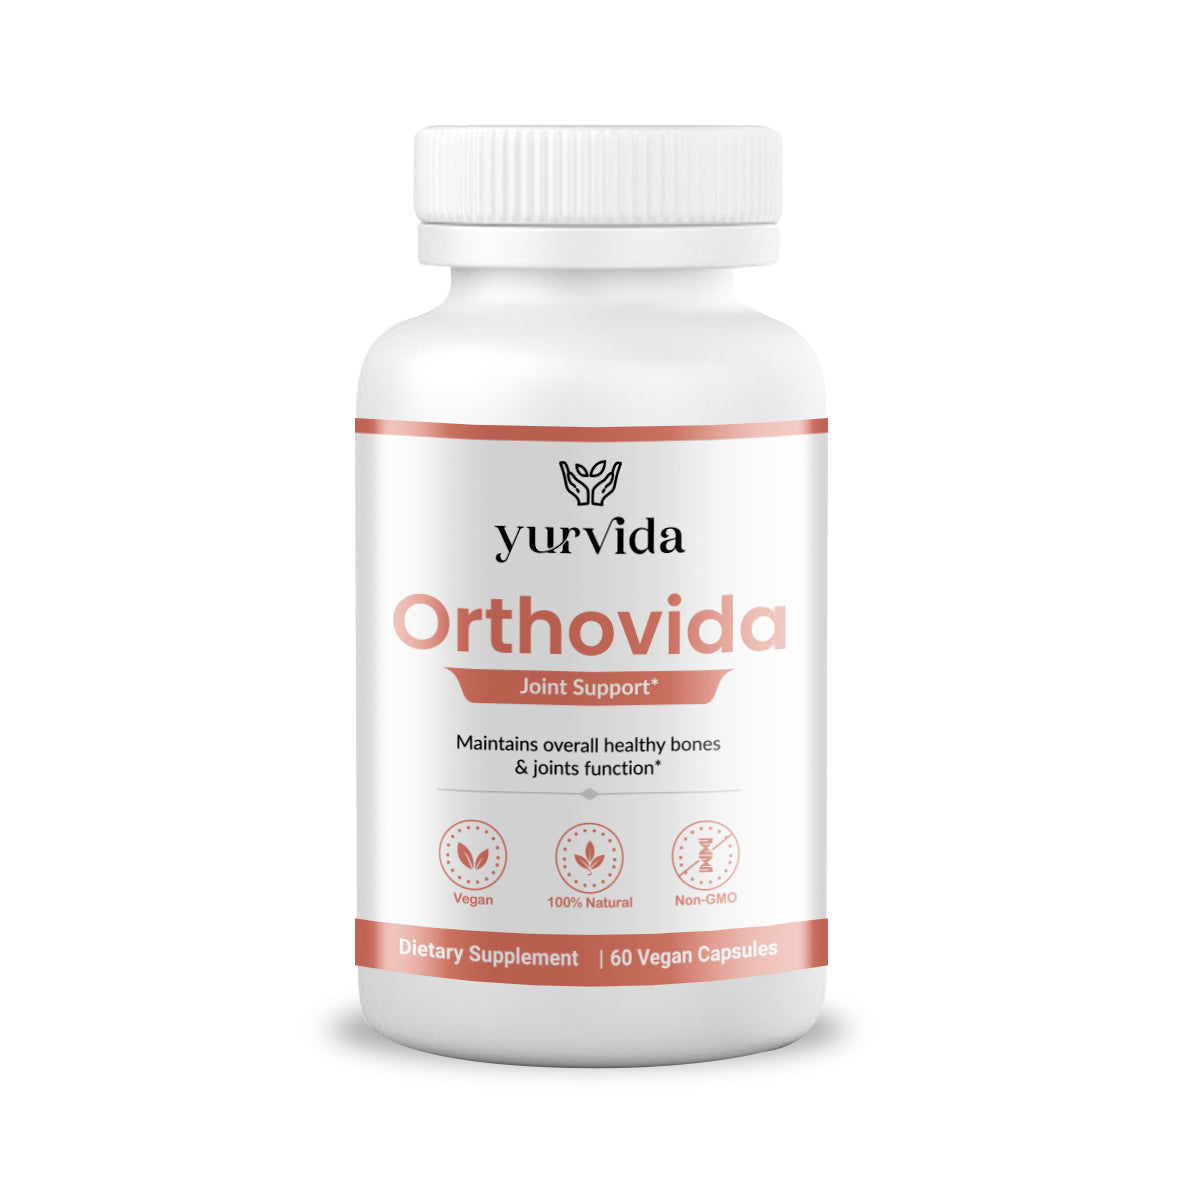 Orthovida - Expert Blend of Purified Extracts for Healthy Joints Function*